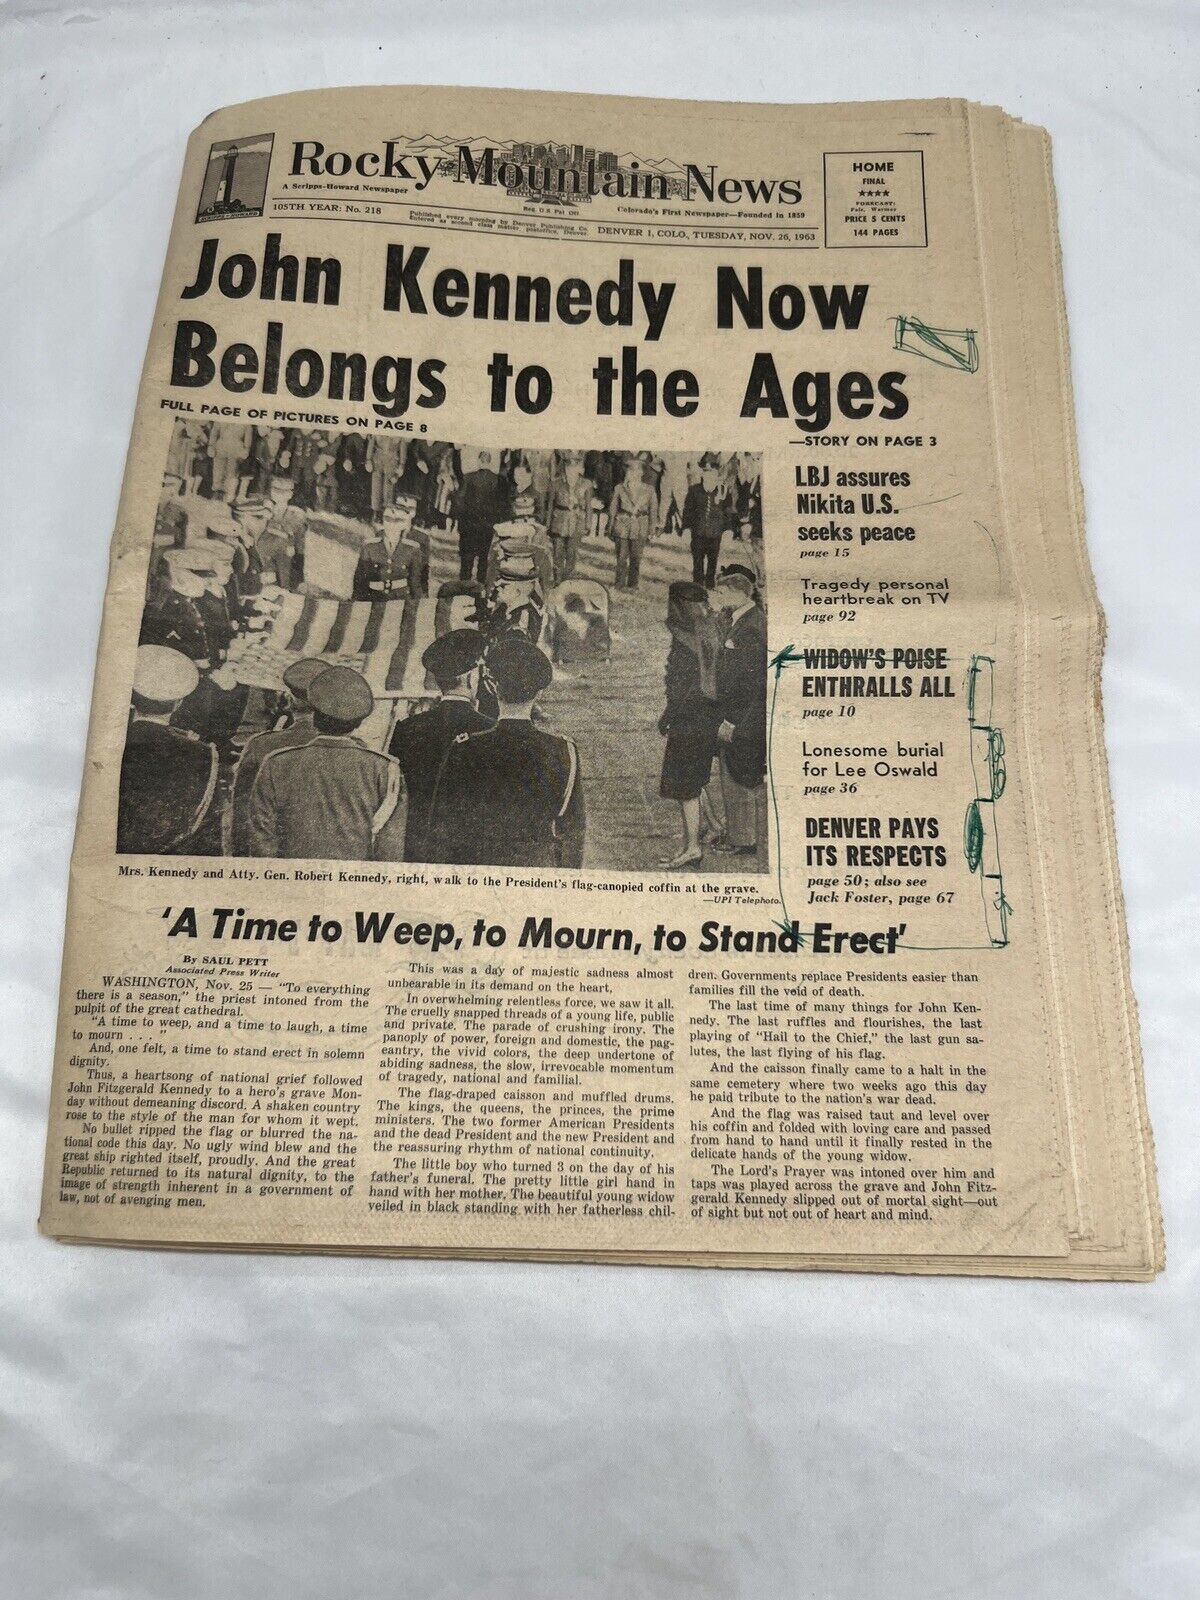 Rocky Mountain News JOHN KENNEDY NOW BELONGS TO THE AGES Nov 26 1963 Orig Comple